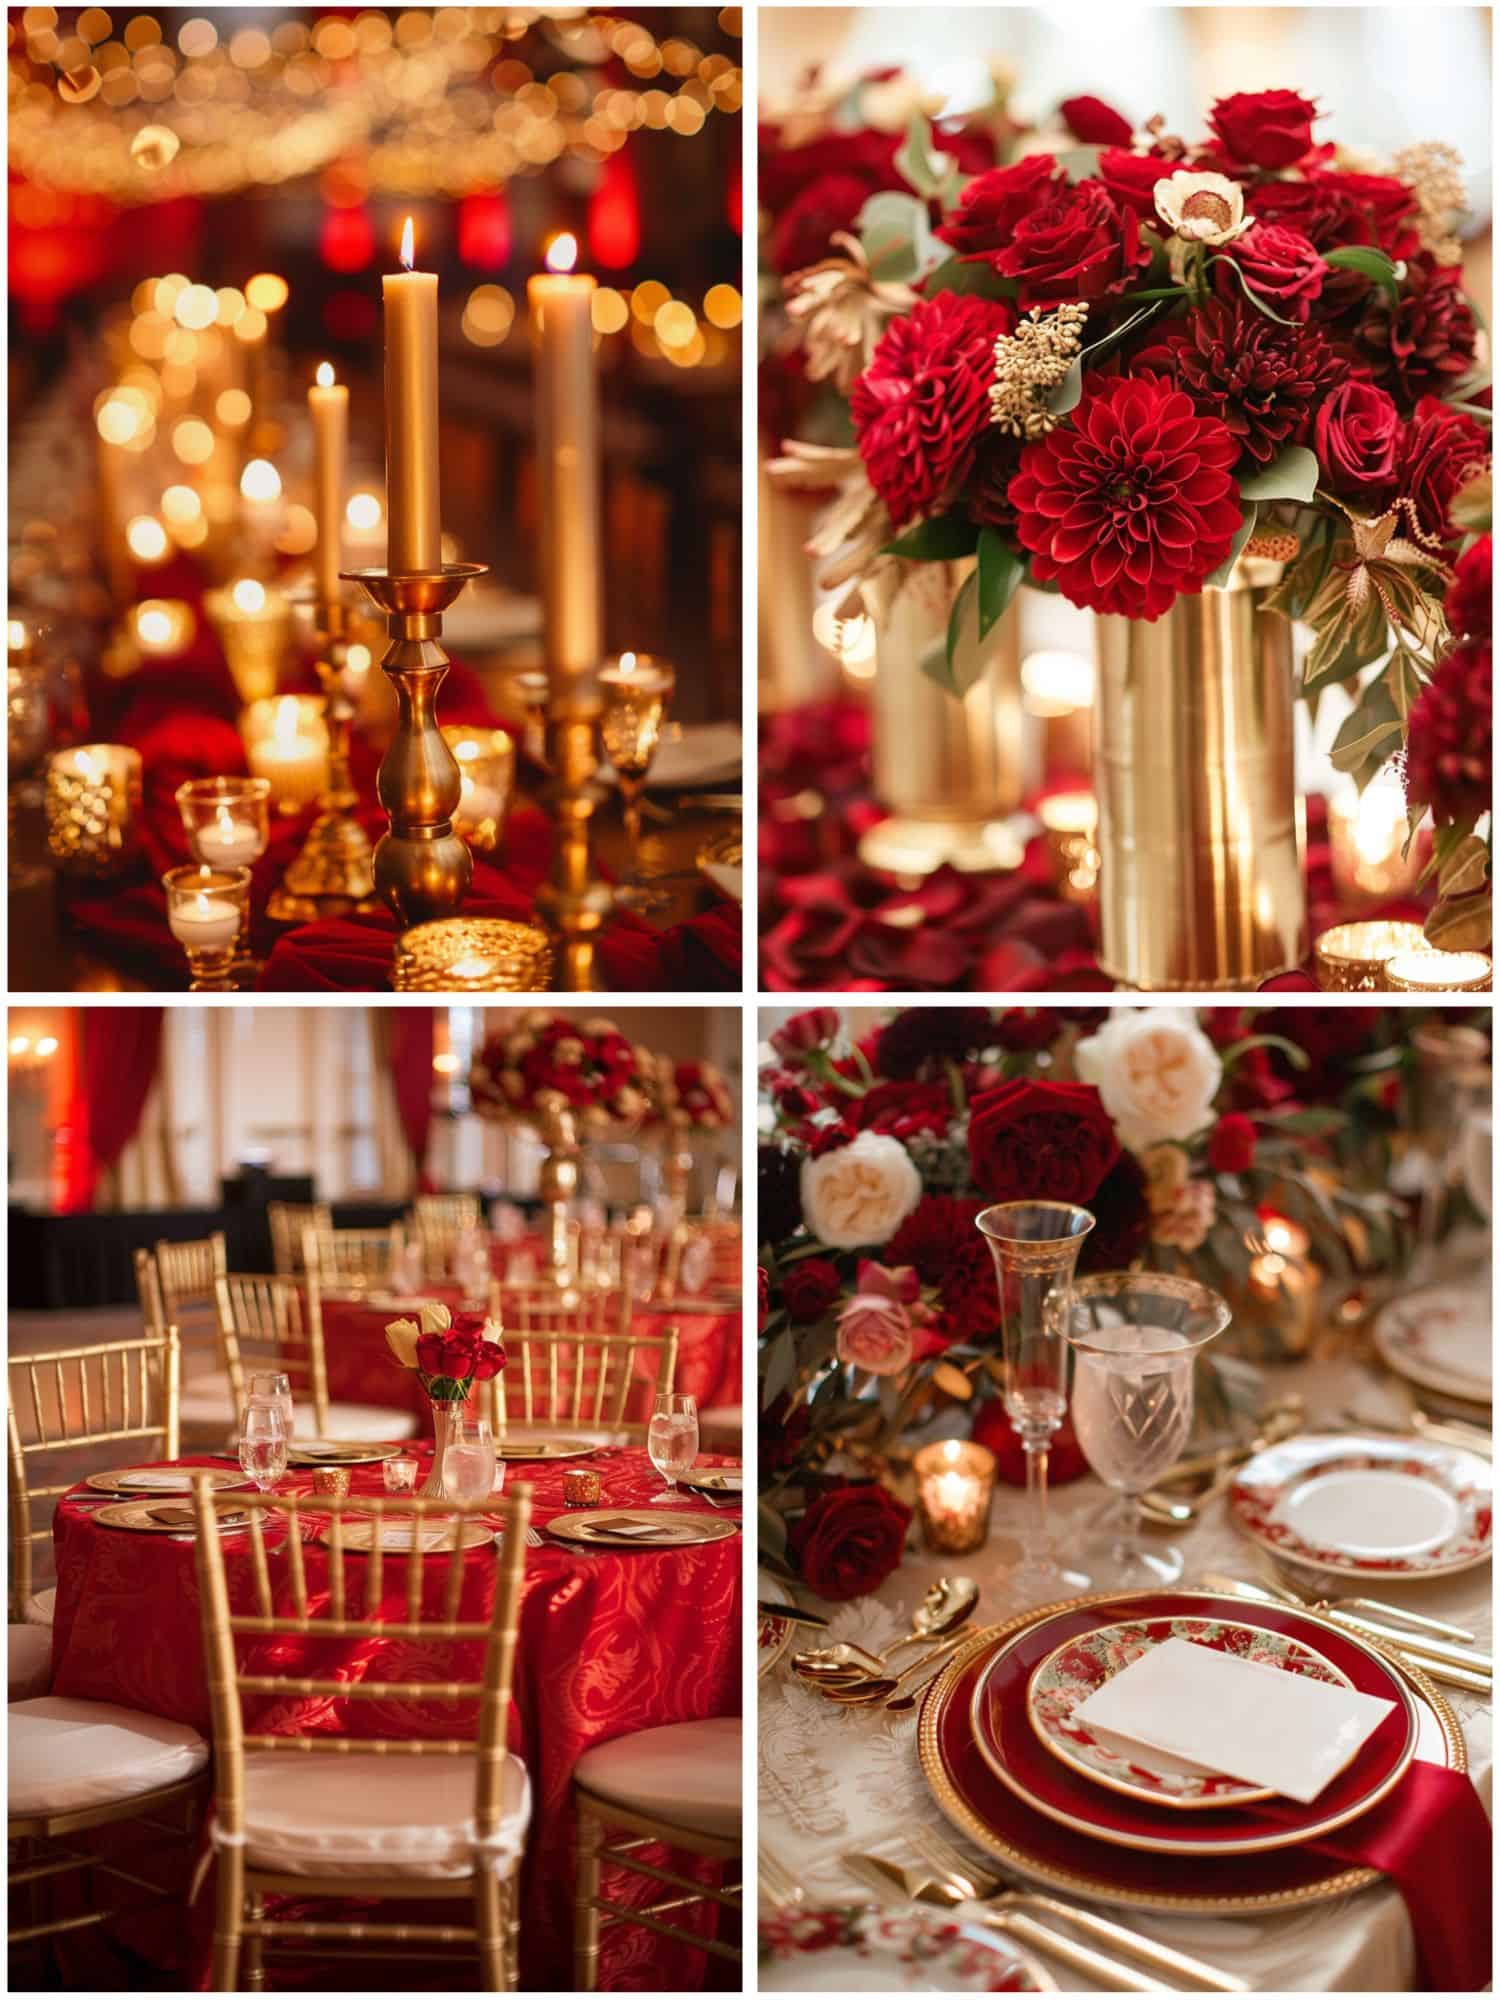 red and gold wedding theme ideas for table decor